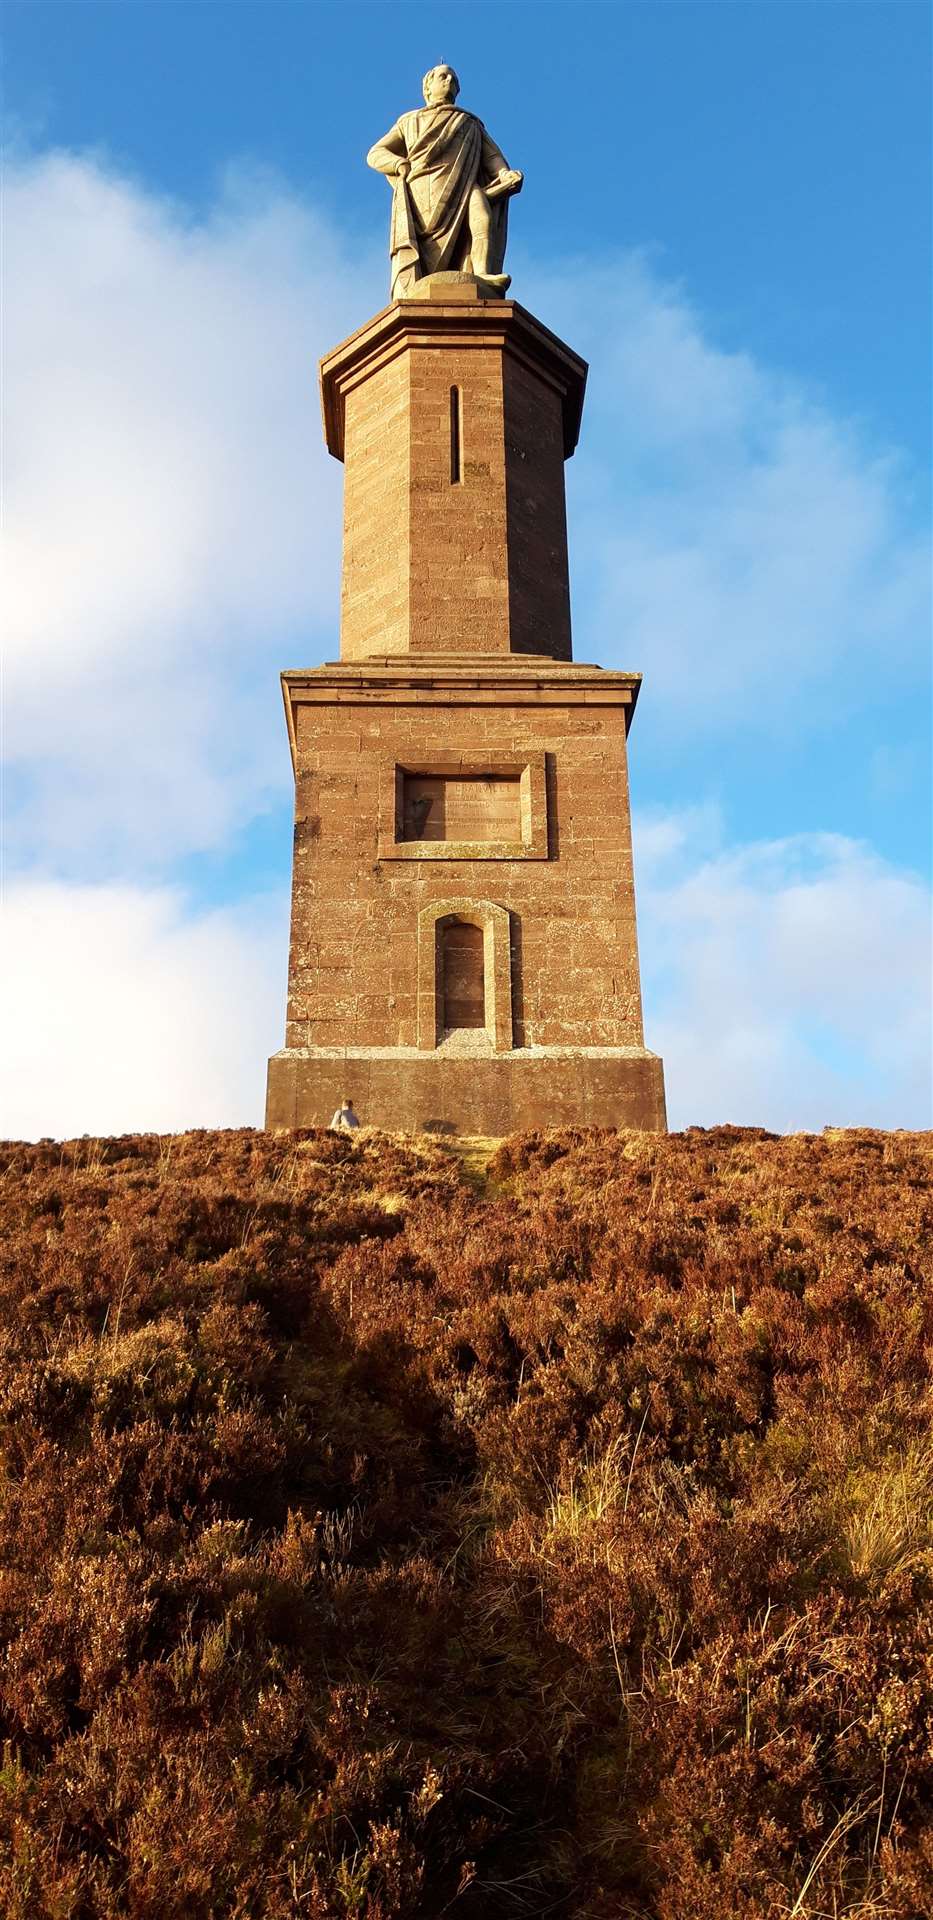 The Duke of Sutherland's statue at the top of Ben Bhraggie.